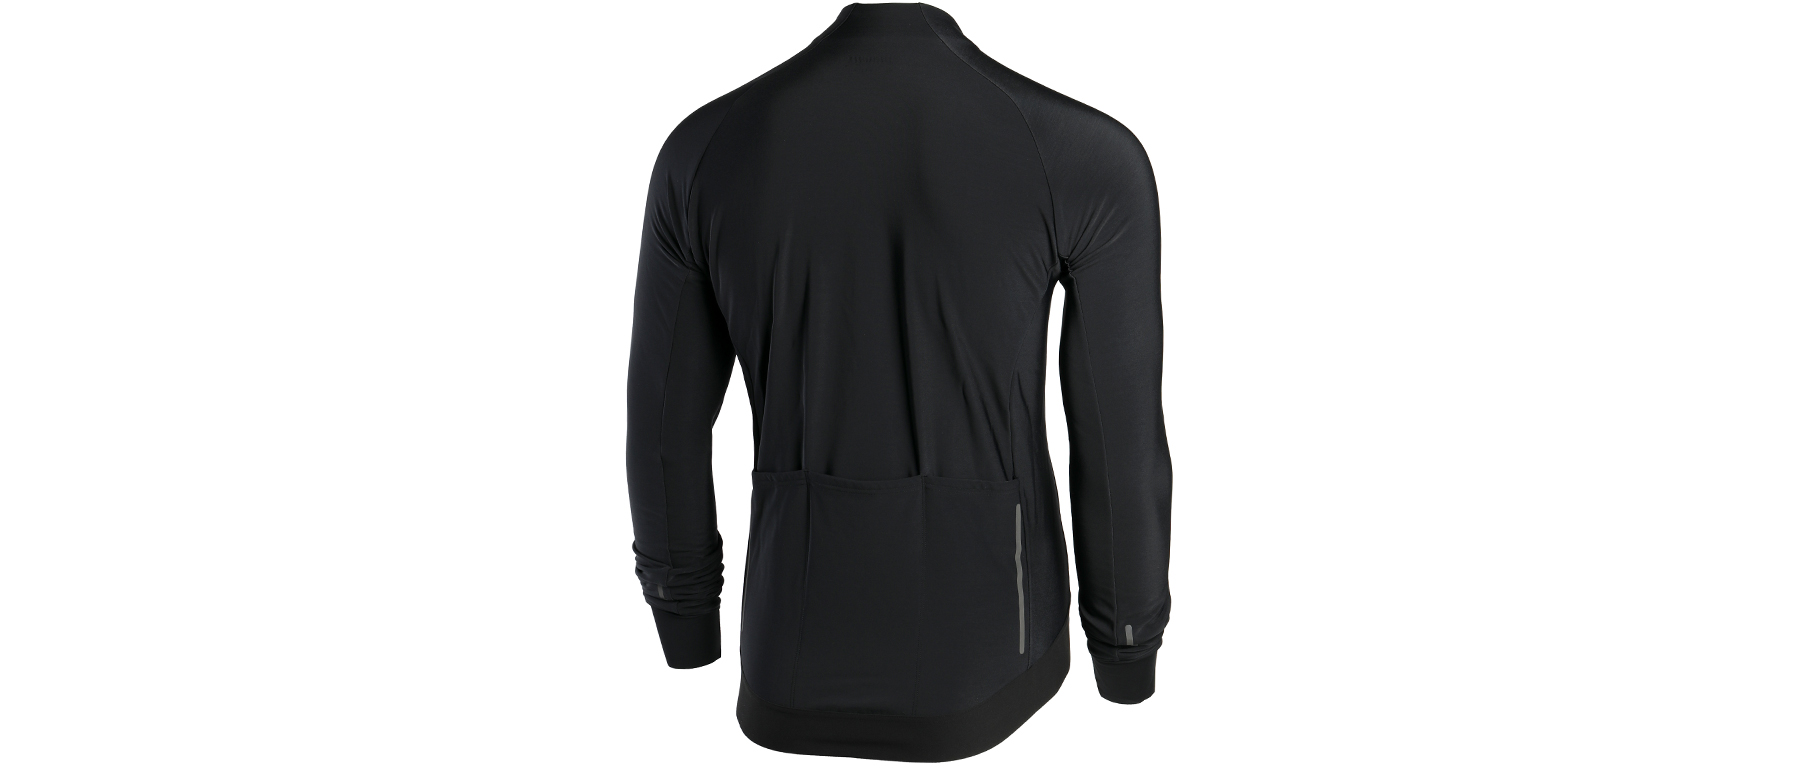 Specialized SL Expert Thermal LS Jersey